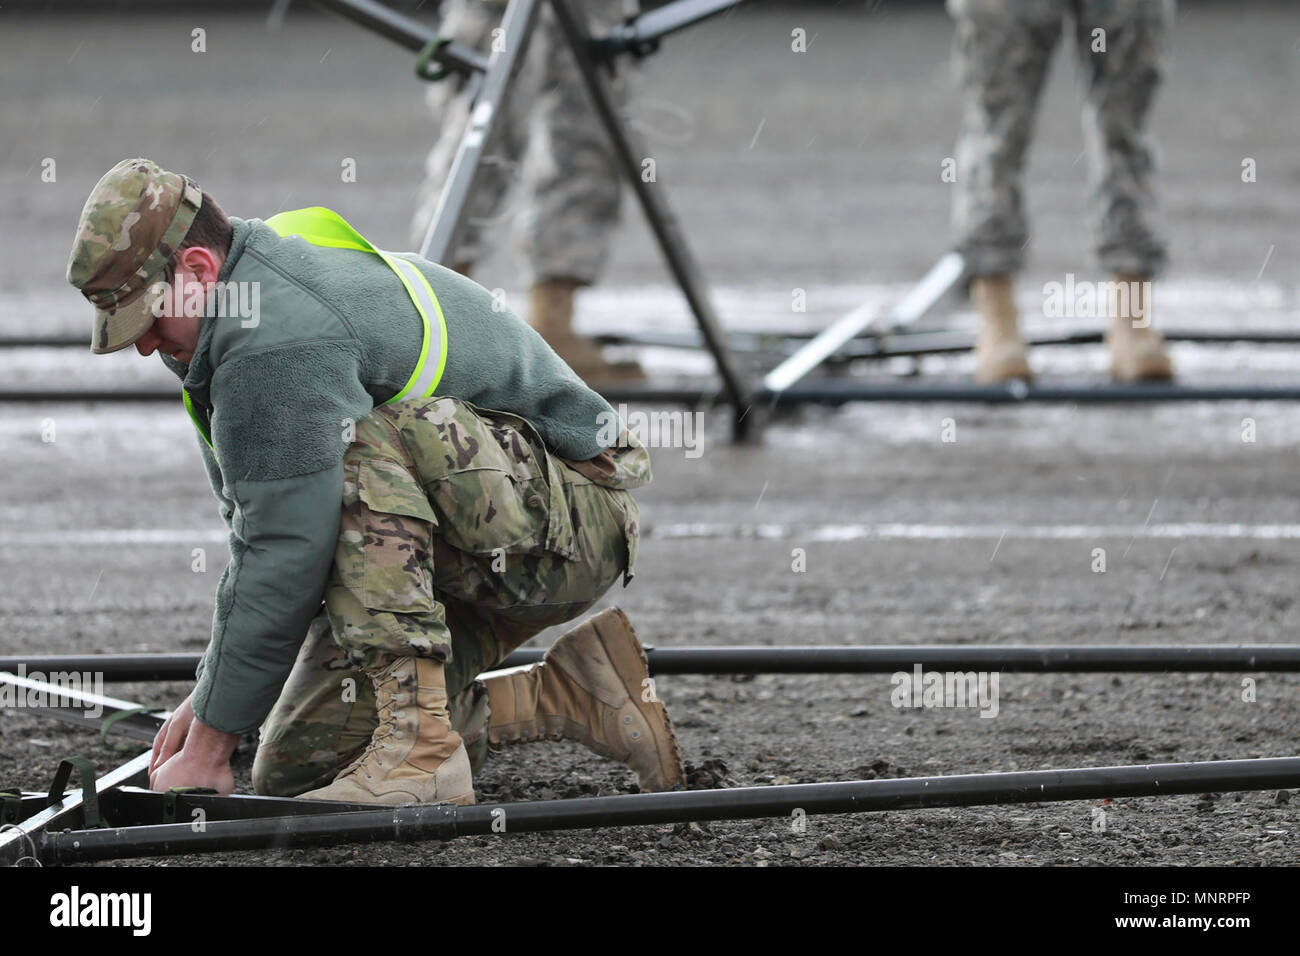 A U.S. Army Reserve Soldier constructs a mobile maintenance tent during Operation Patriot Bandolier at Military Ocean Terminal Concord, California, Mar. 2, 2018. Operation Patriot Bandolier is a real-world strategic mission utilizing U.S. Army Reserve, National Guard and Active component Soldiers transport Army materiel and munitions containers across the U.S. Stock Photo